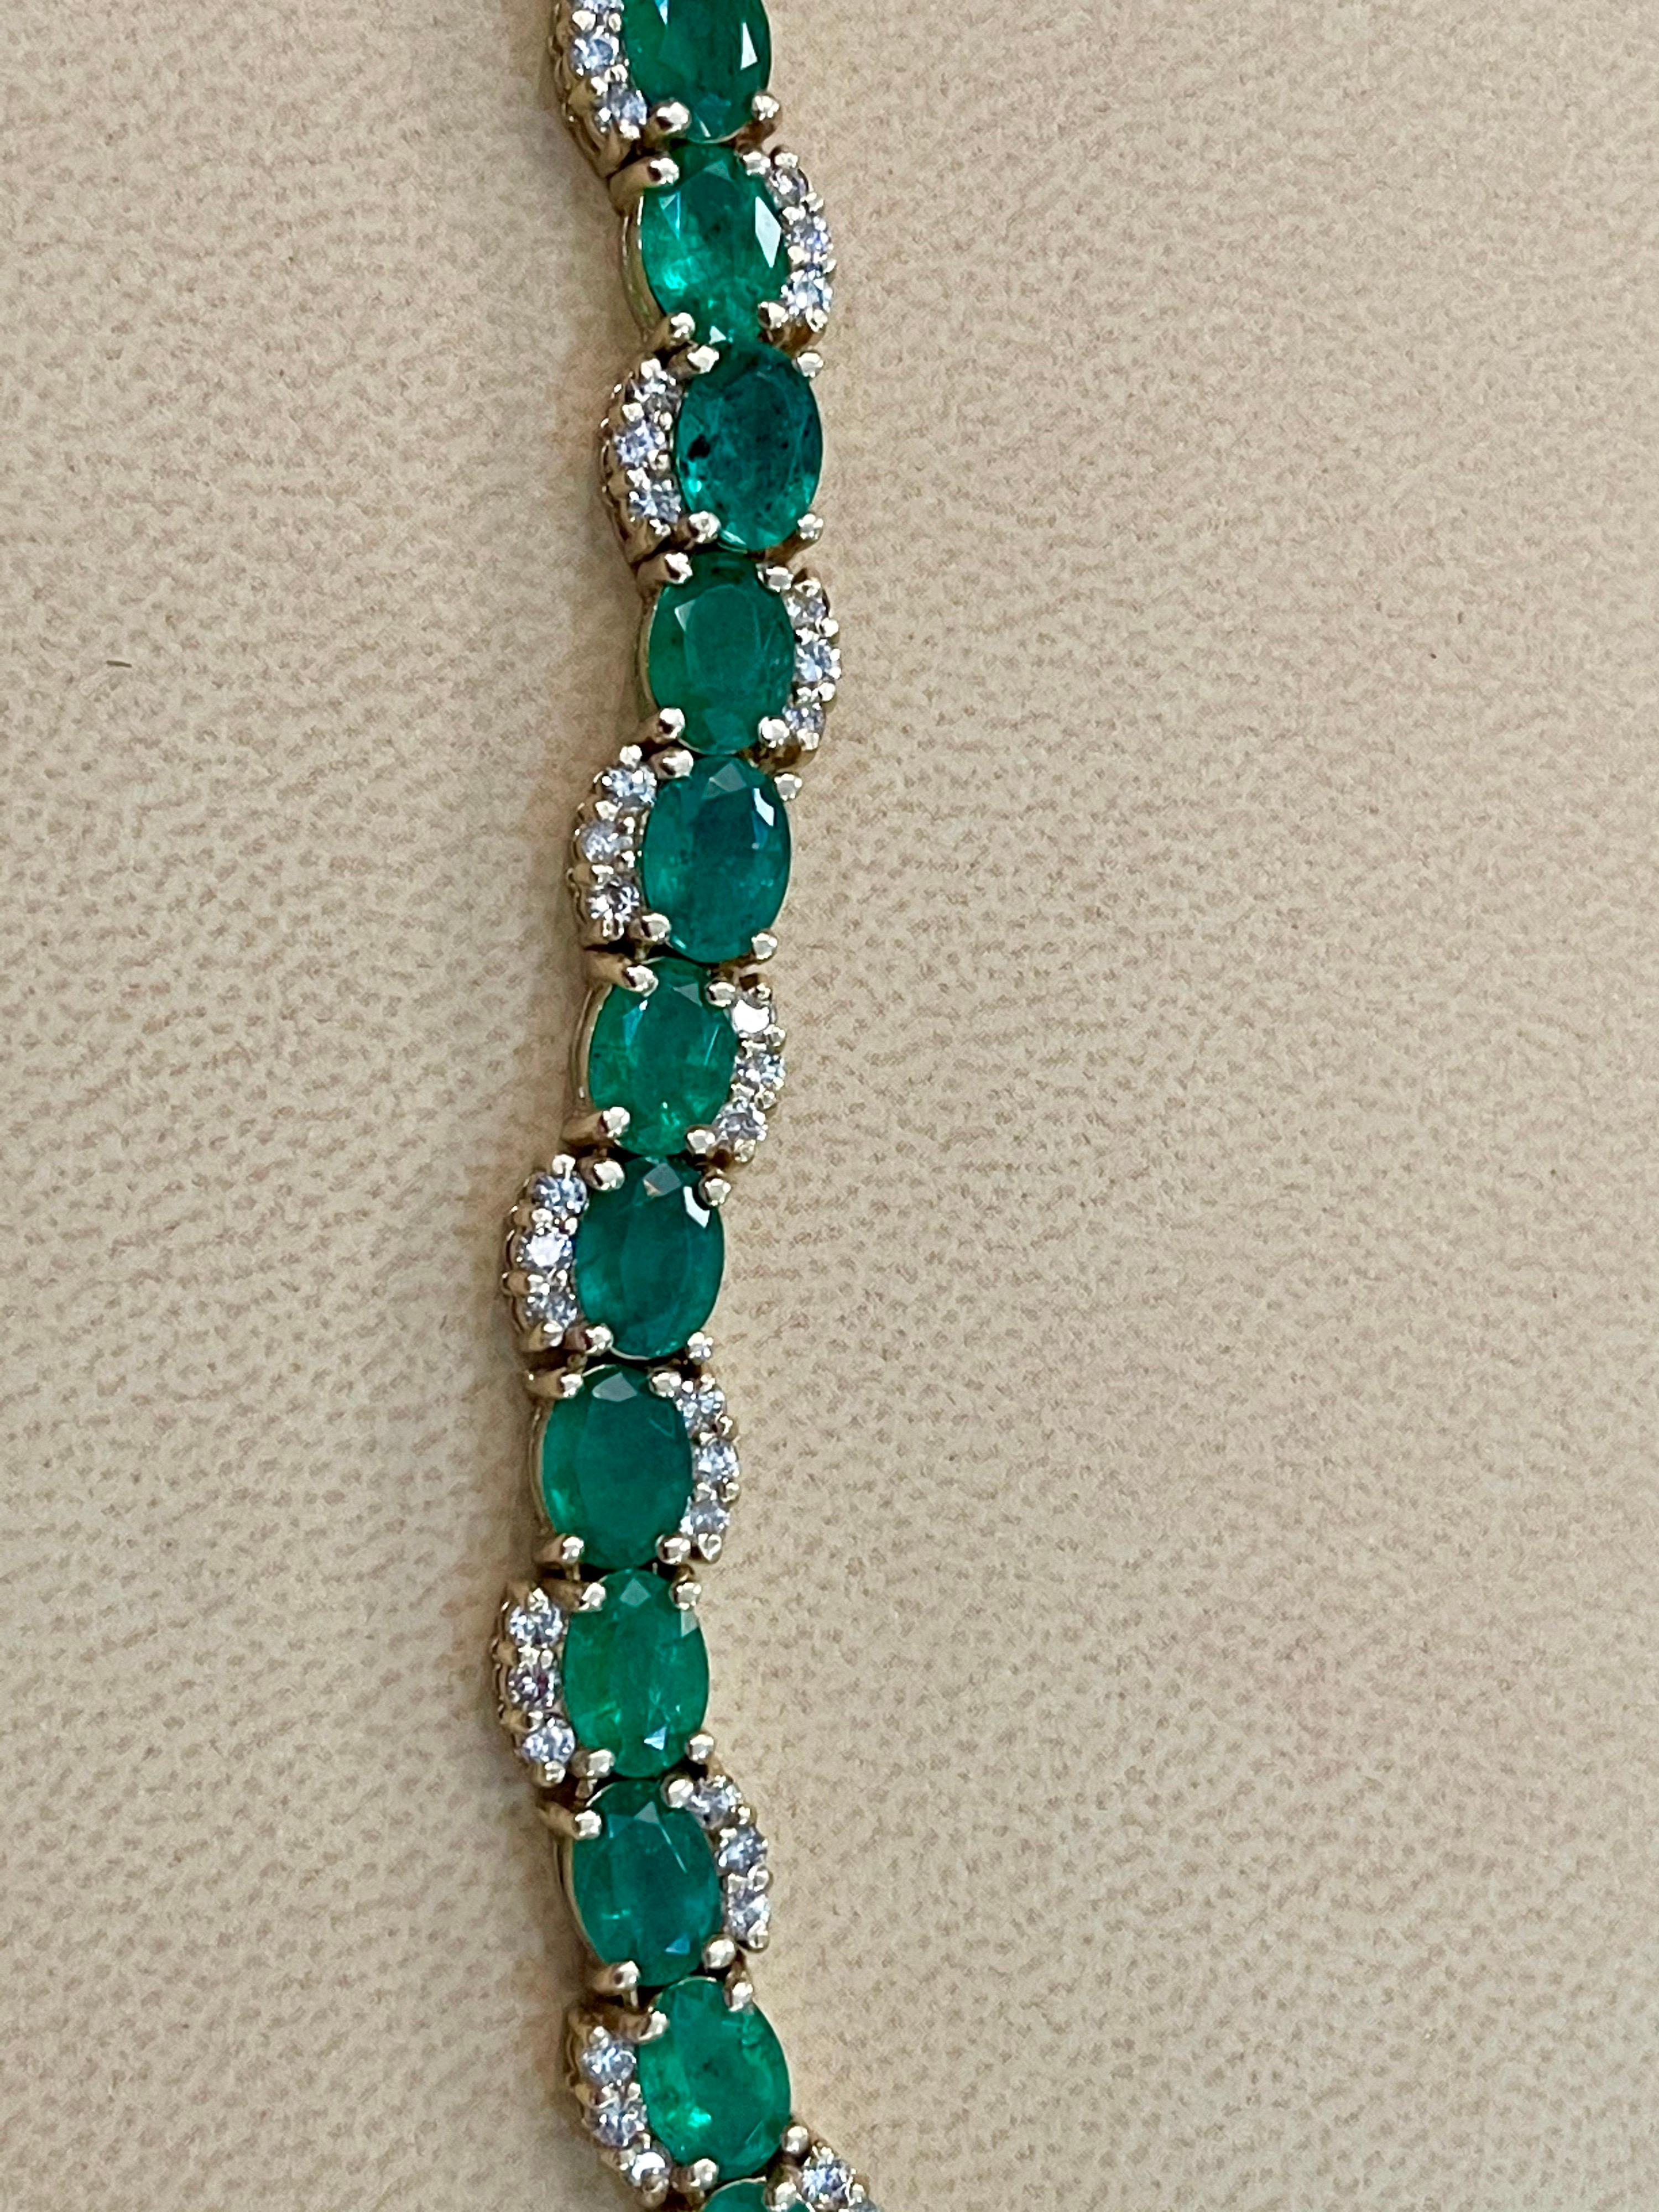  approximately 21 Carat Natural Brazil Emerald & 2.6 Ct Diamond Tennis Bracelet 14 Karat Y Gold
 This exceptionally affordable Tennis  bracelet has  26  stones of oval  Emeralds  . Each Emerald is capped by  three diamonds . Total weight of the